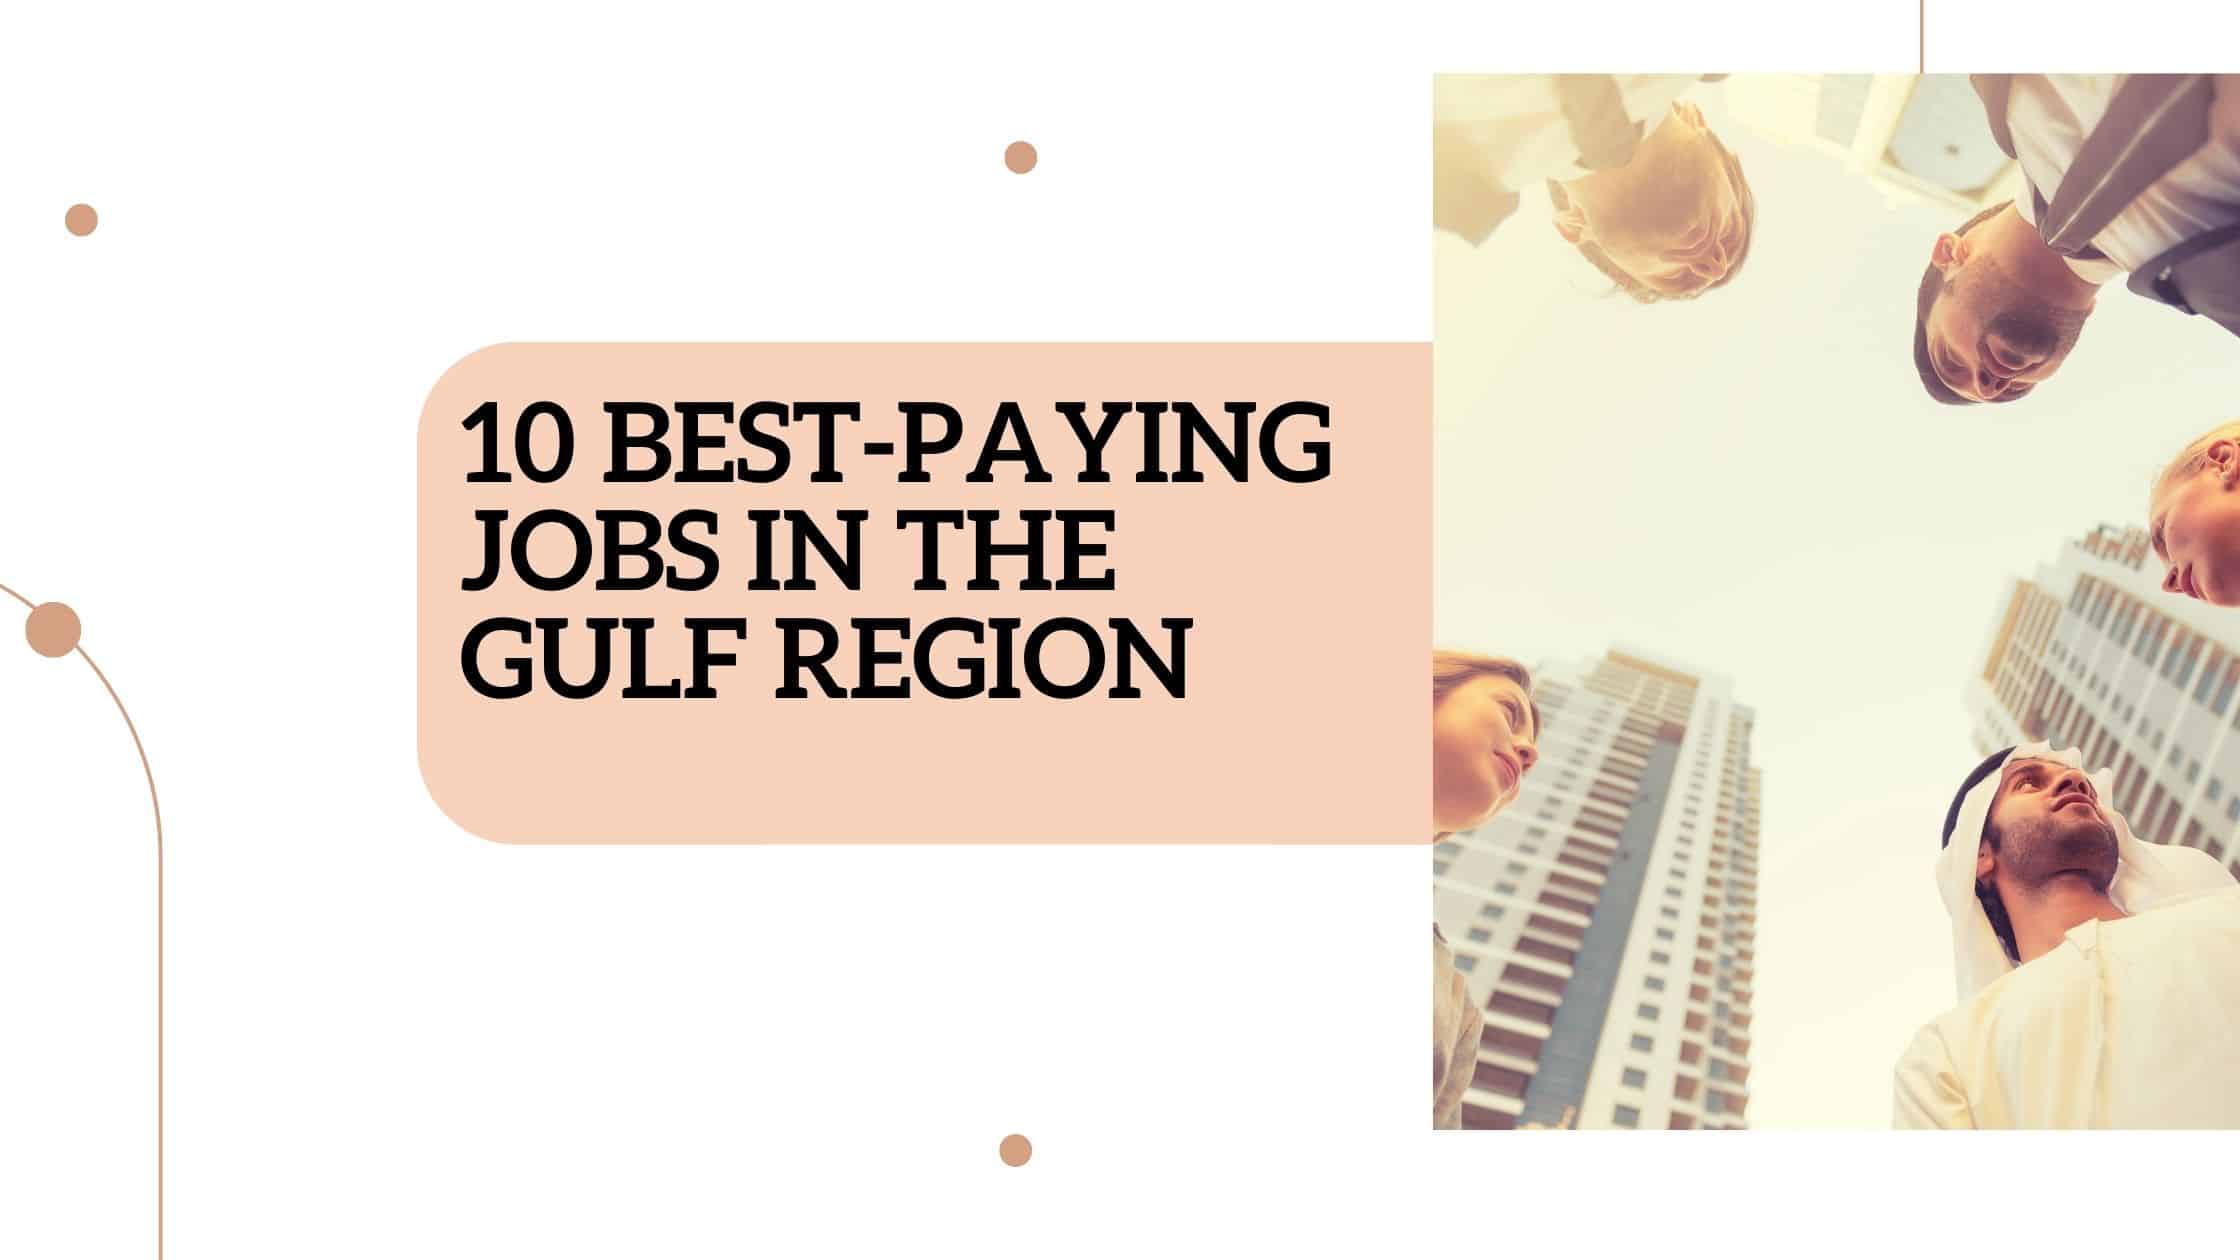 10 best-paying jobs in the Gulf region